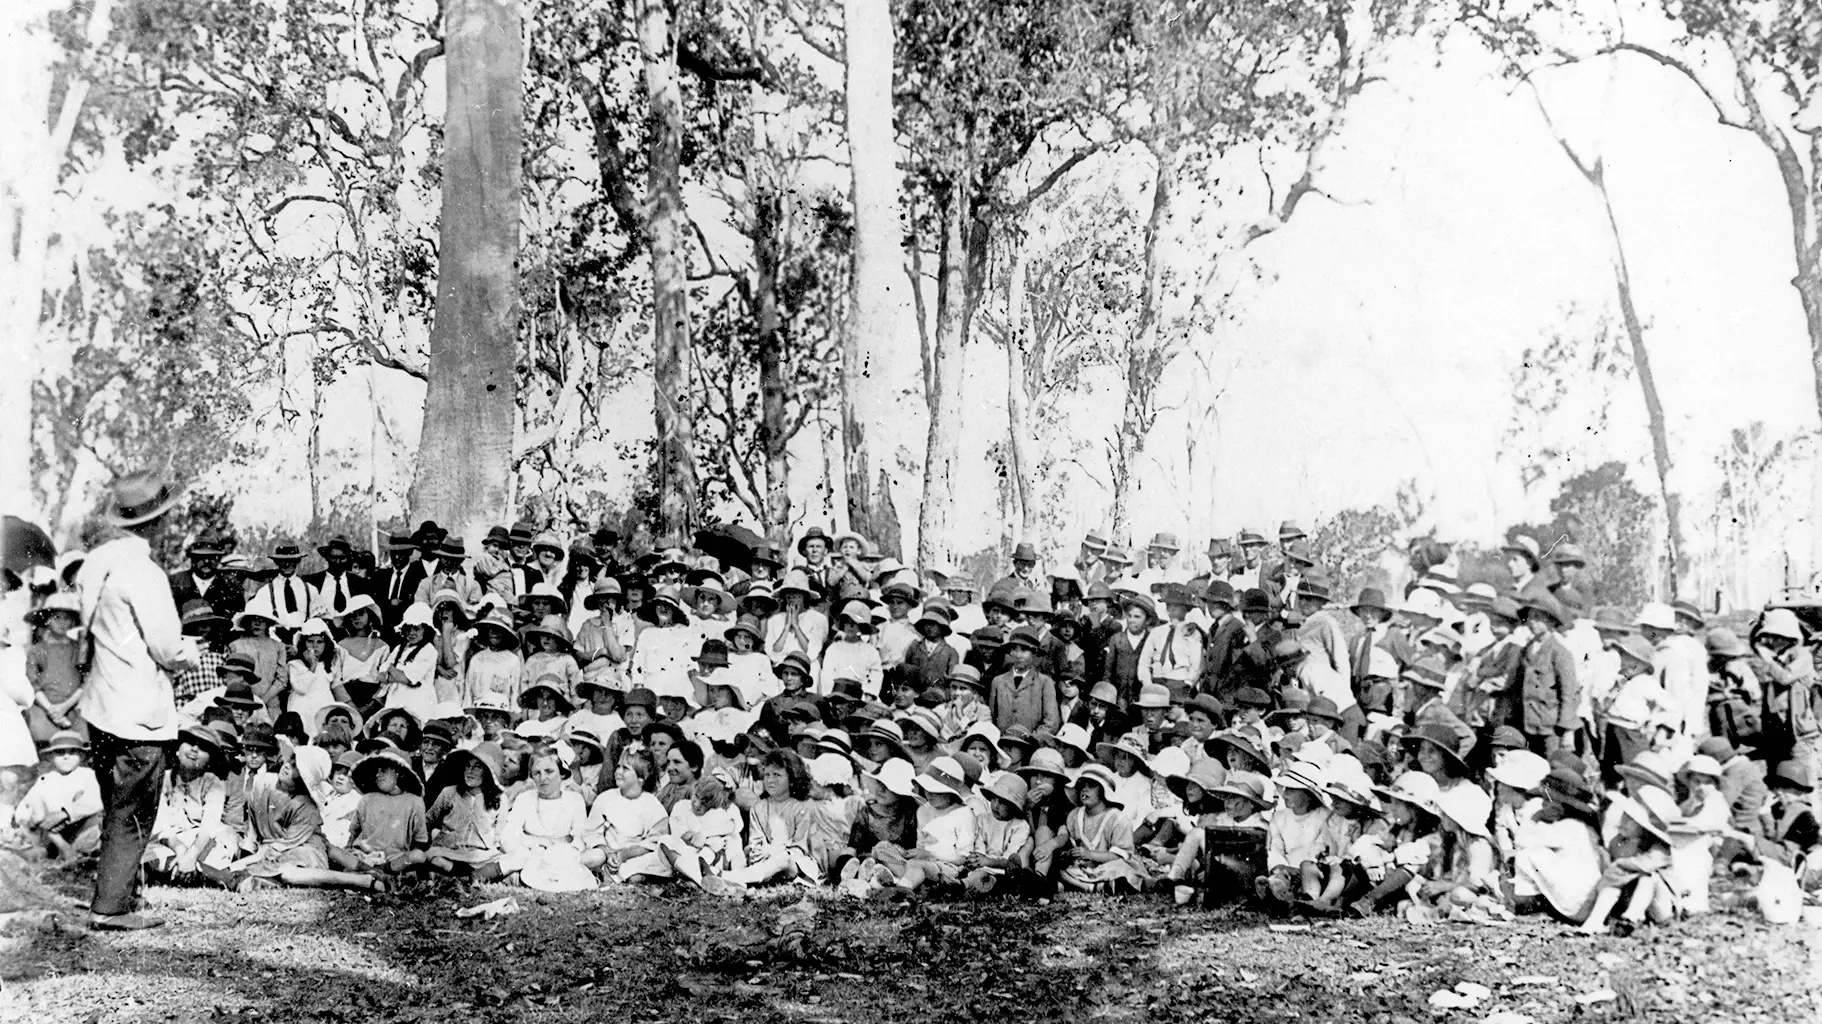 In 1909, the Australian Ornithologists’ Union suggested that schools in Victoria celebrate “Bird Day”. The first Bird Day was celebrated in schools later that year. Teachers worked with naturalists to create special lessons and took their students outdoors or on field trips to celebrate birds and nature. The day was a huge success, and many pupils were inspired to join a new society called “The Gould League of Bird Lovers”. Do you have similar activities at your school?